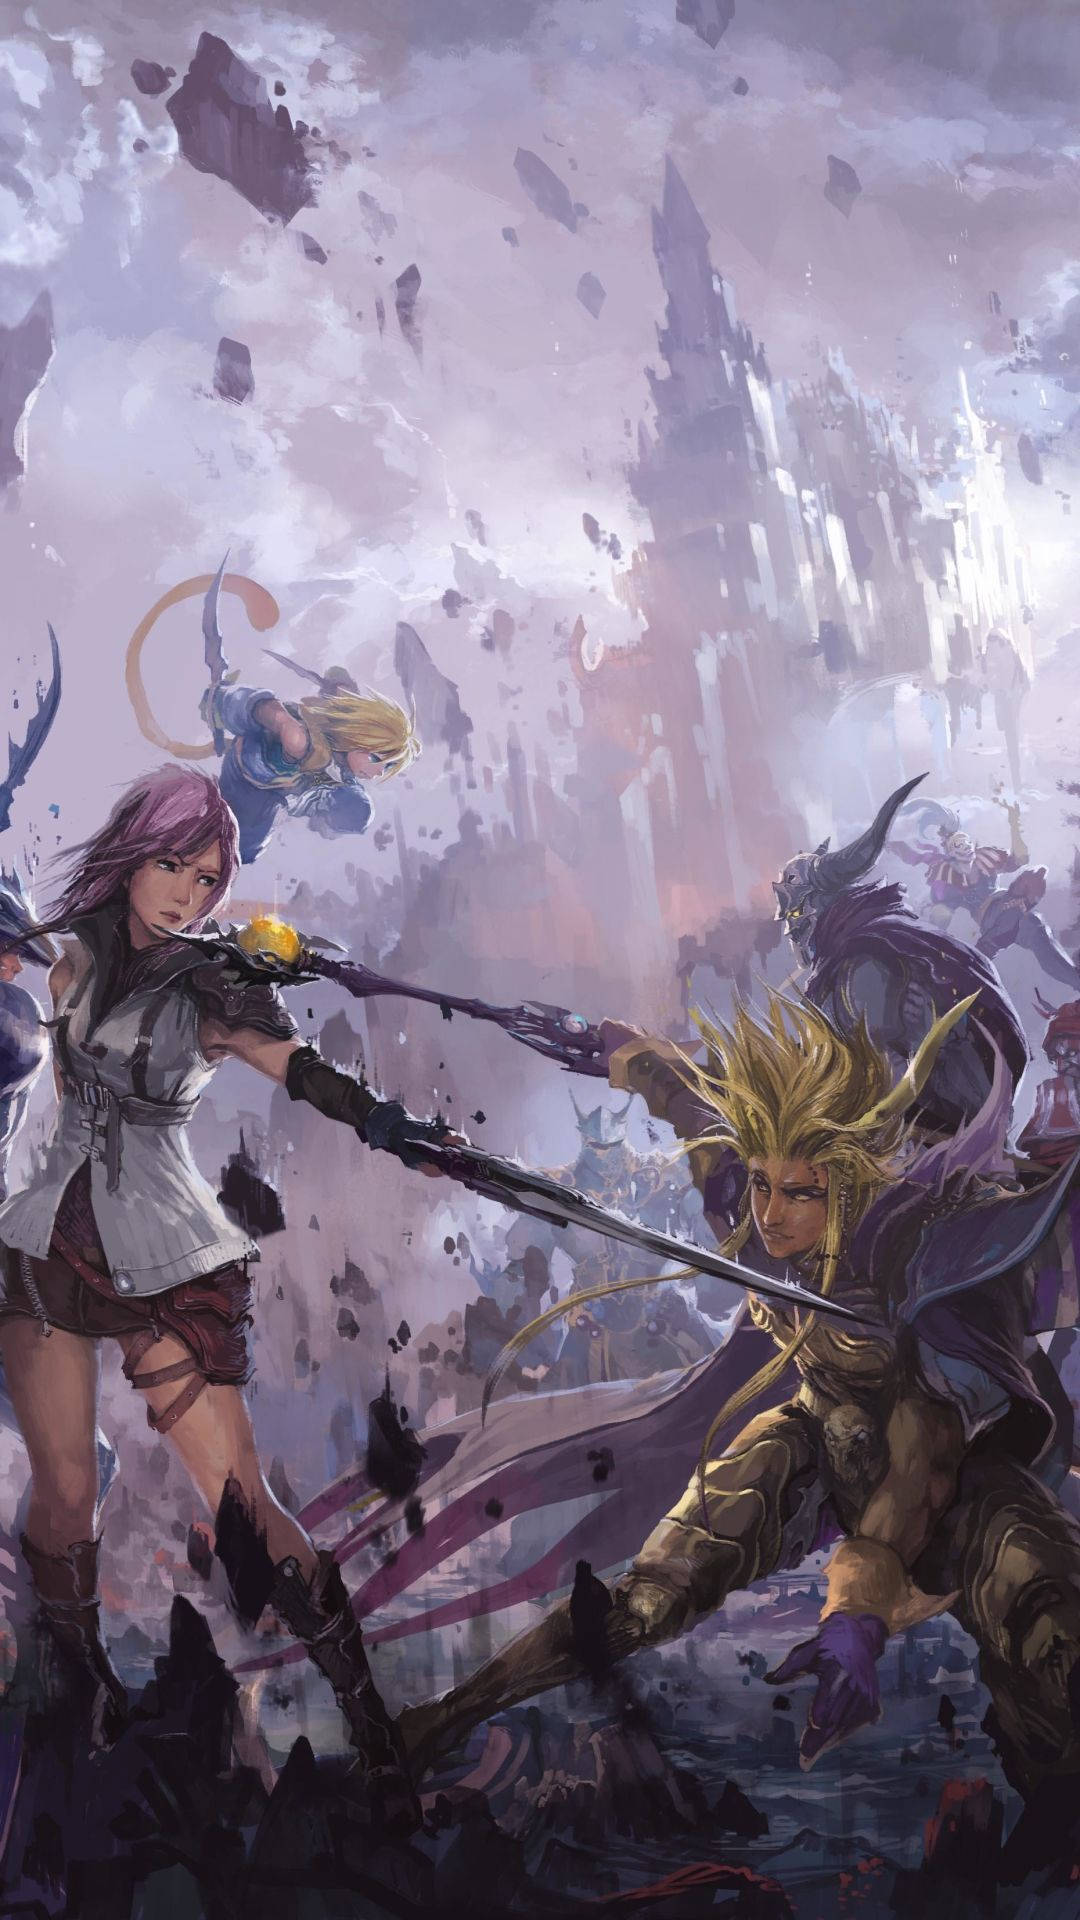 Feel the thrill of adventure with Final Fantasy on your iPhone. Wallpaper